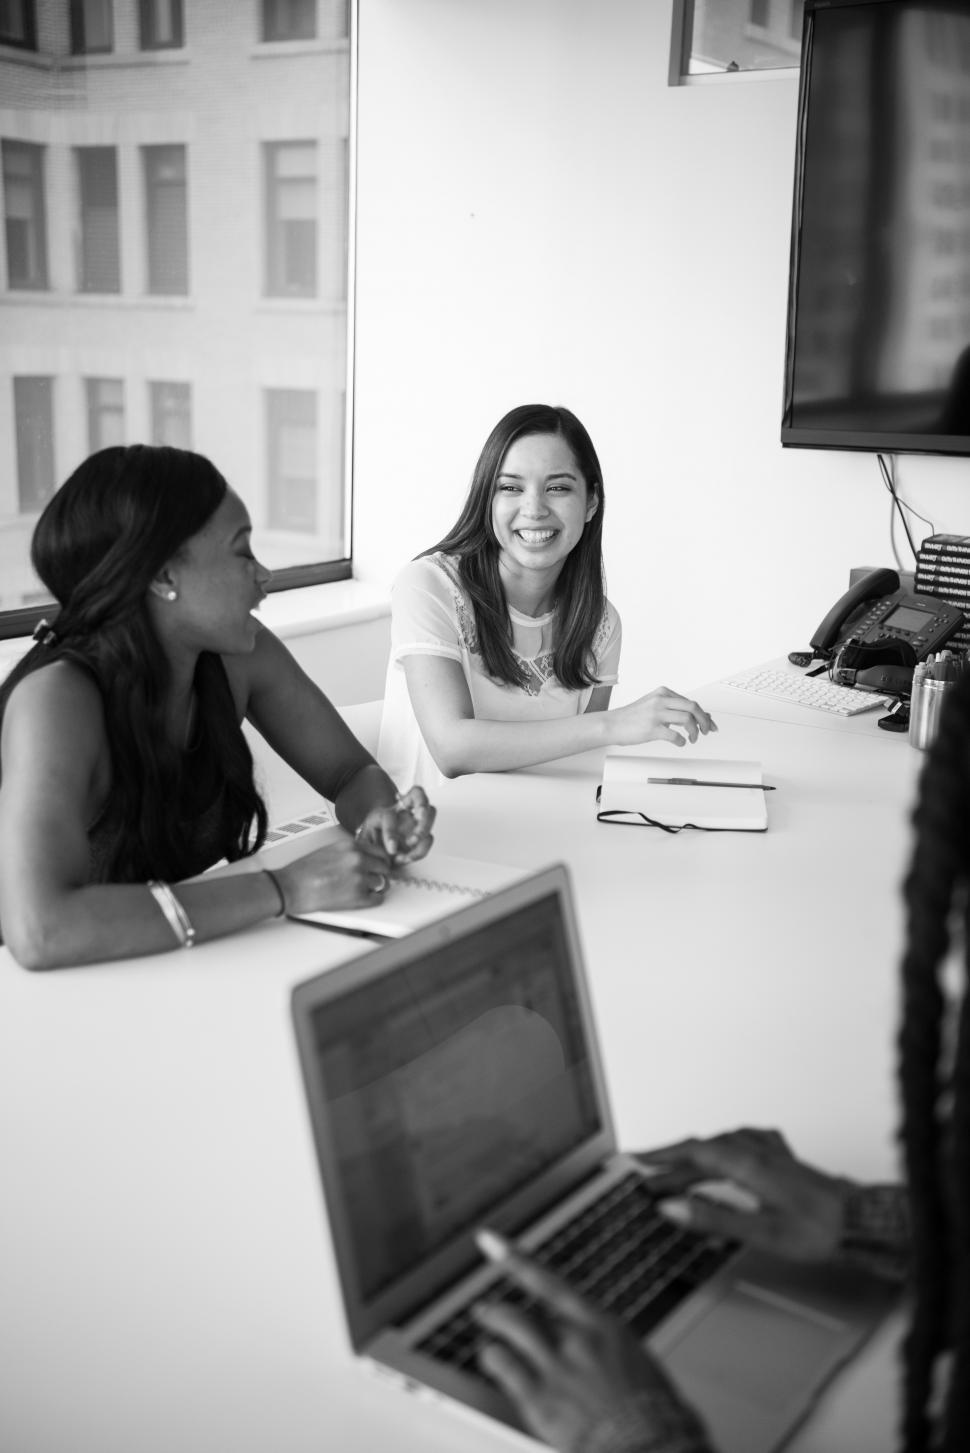 Free Image of Two businesswomen smiling in meeting - b&w 